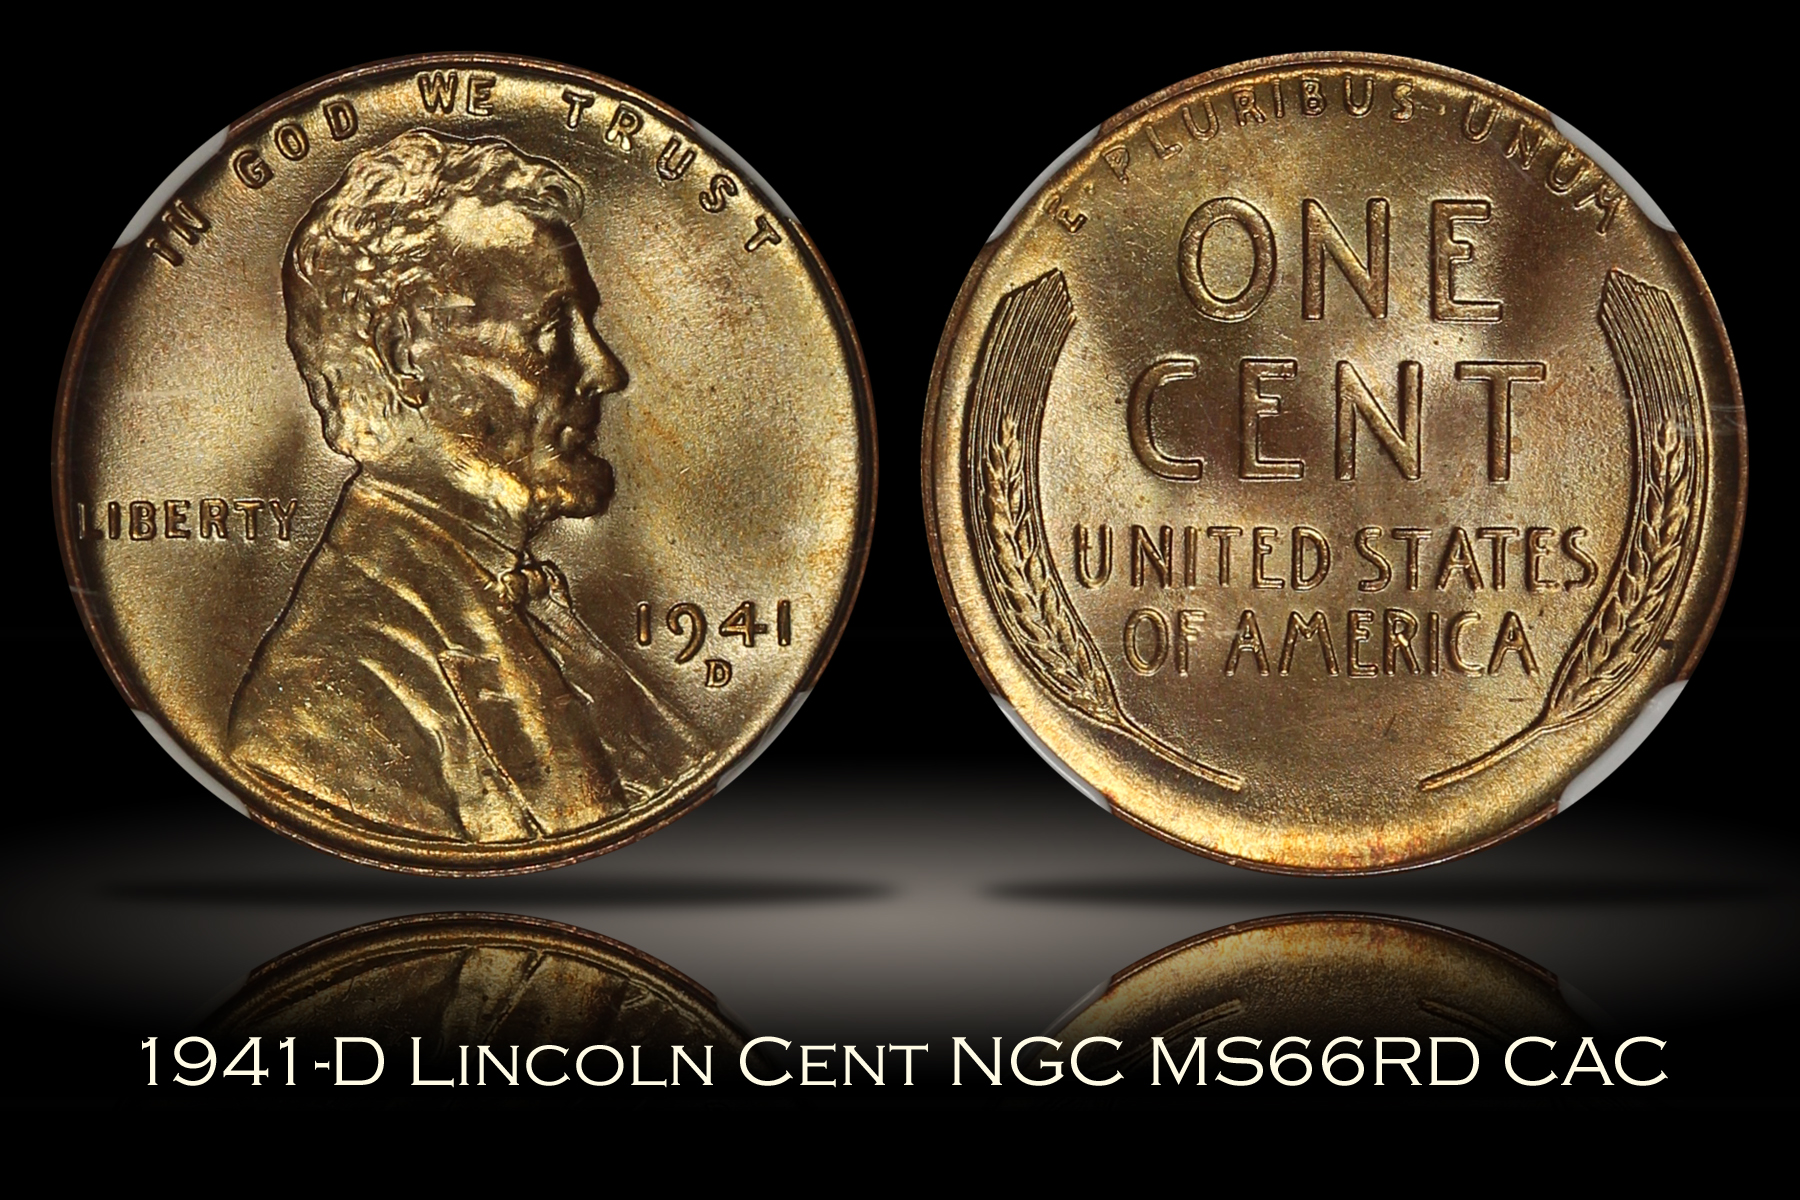 1941-D Lincoln Cent NGC MS66RD CAC